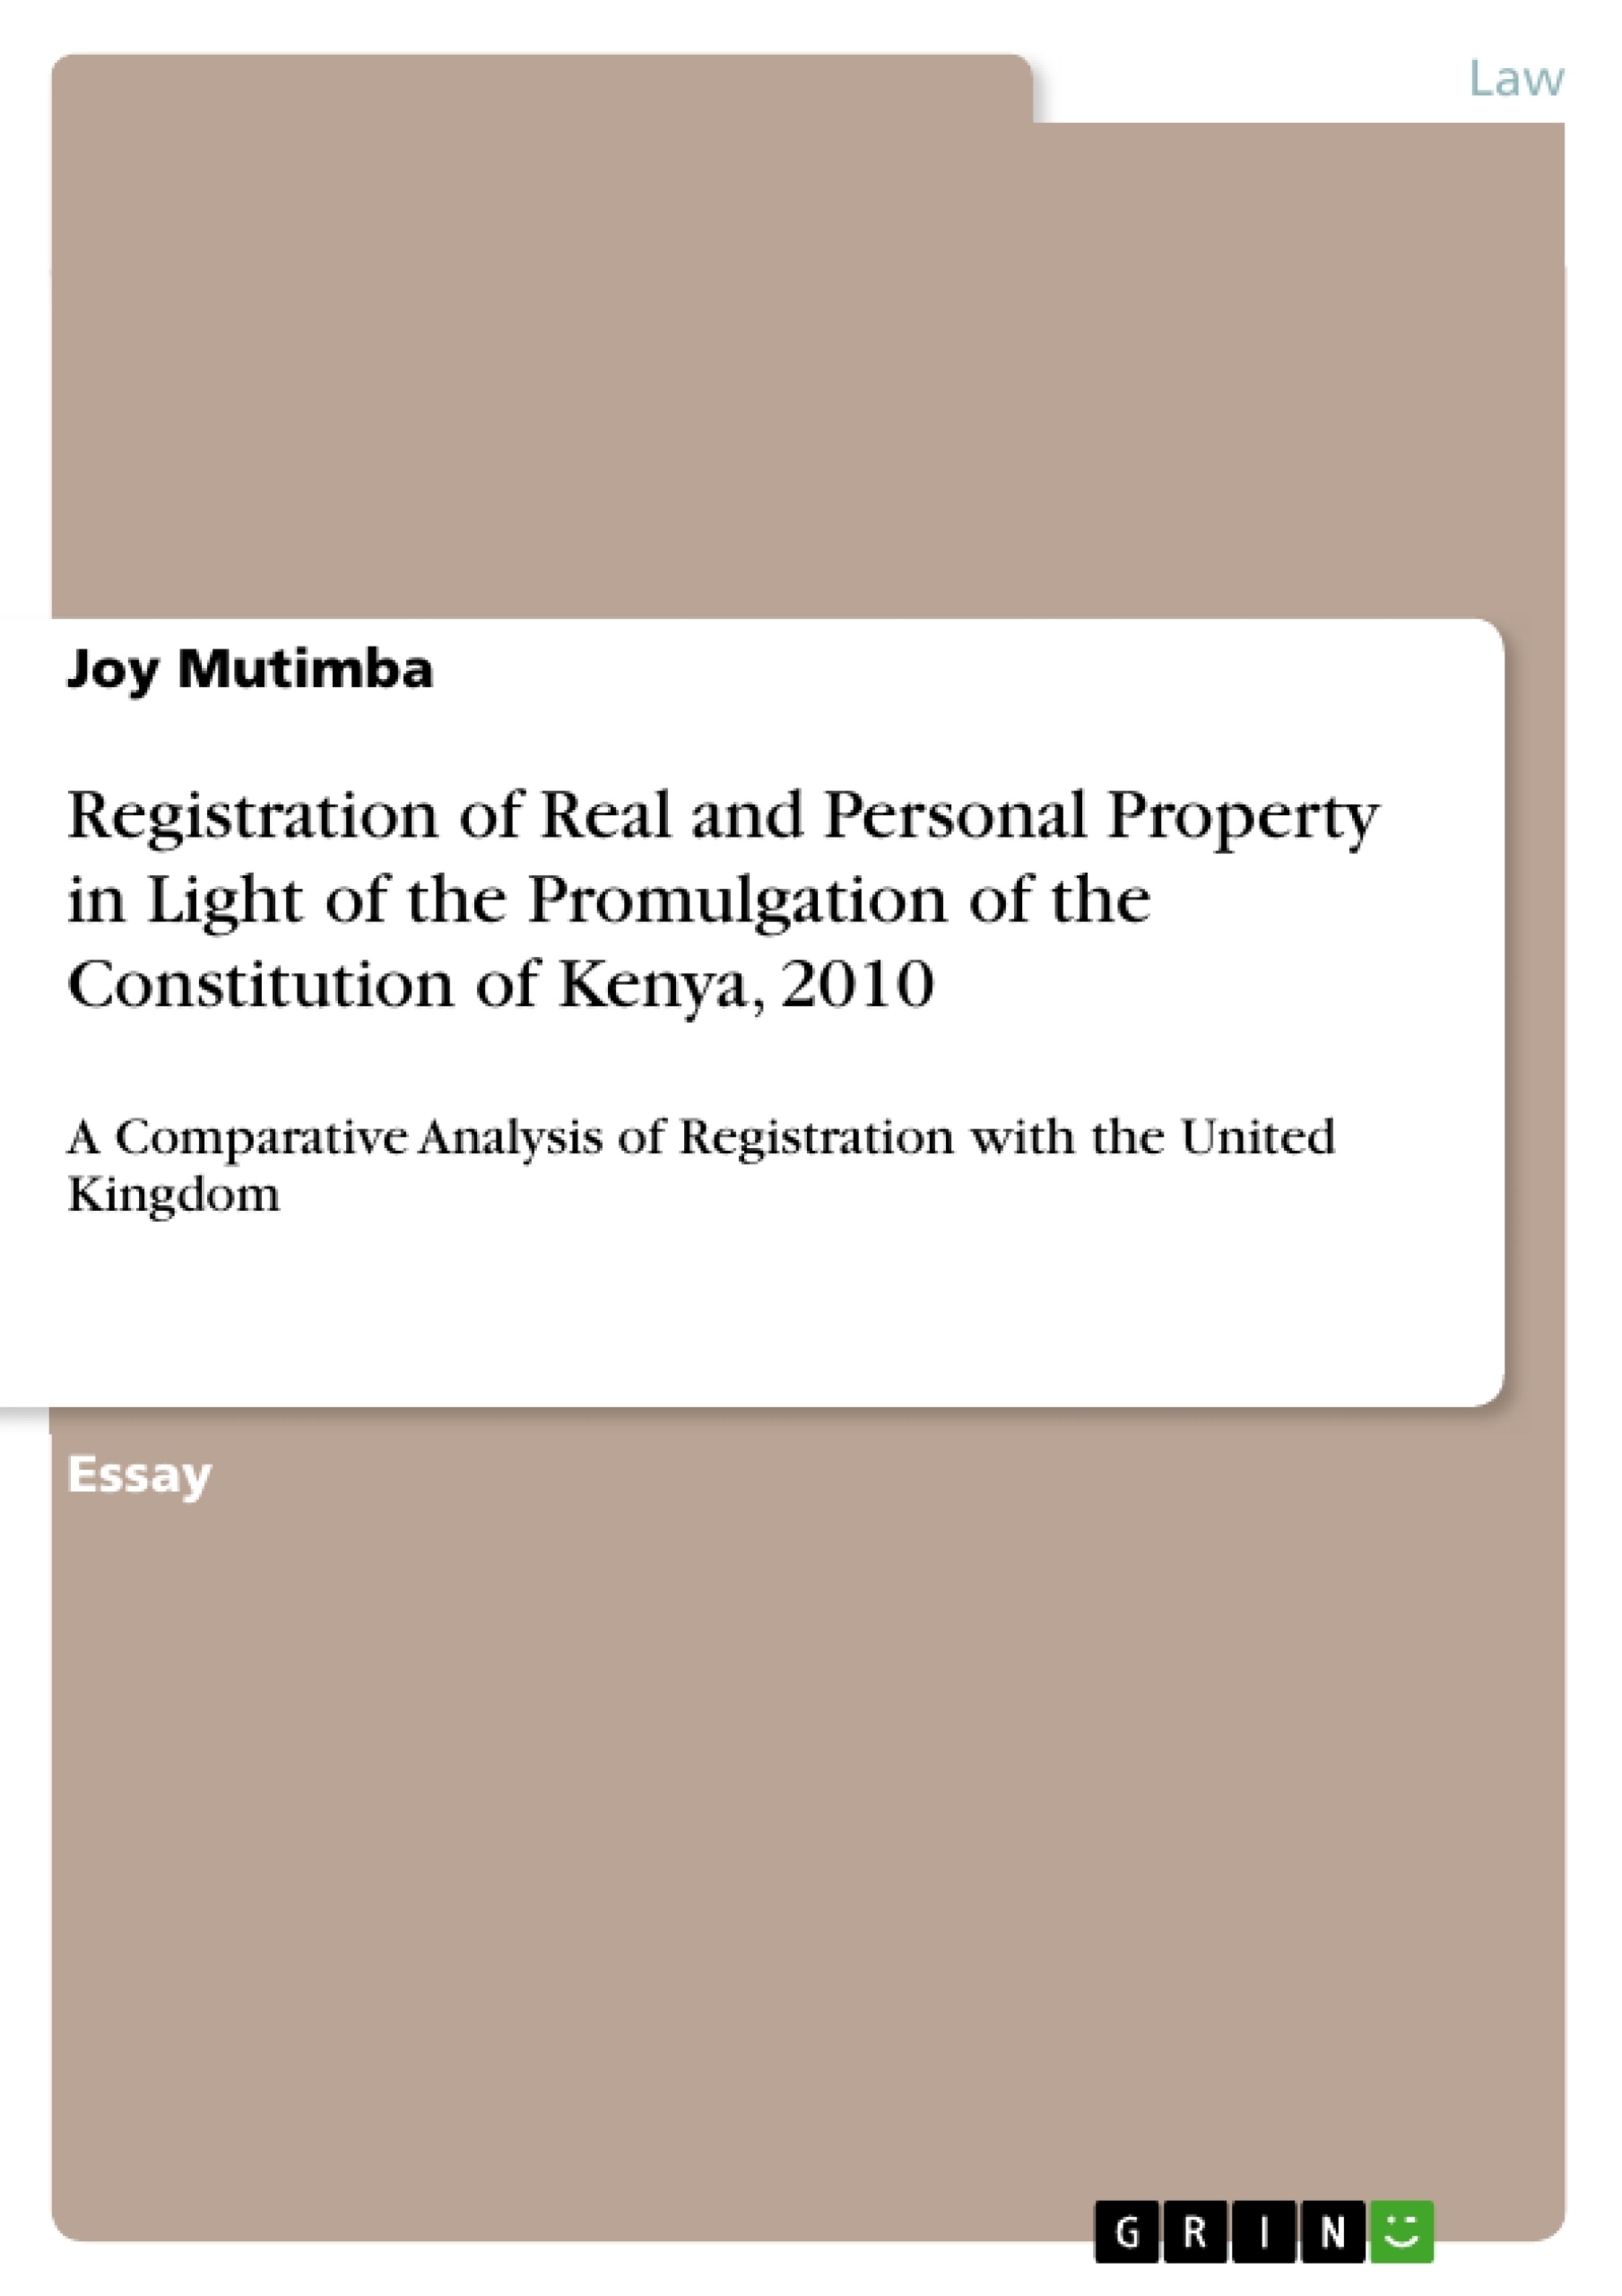 Titre: Registration of Real and Personal Property in Light of the Promulgation of the Constitution of Kenya, 2010